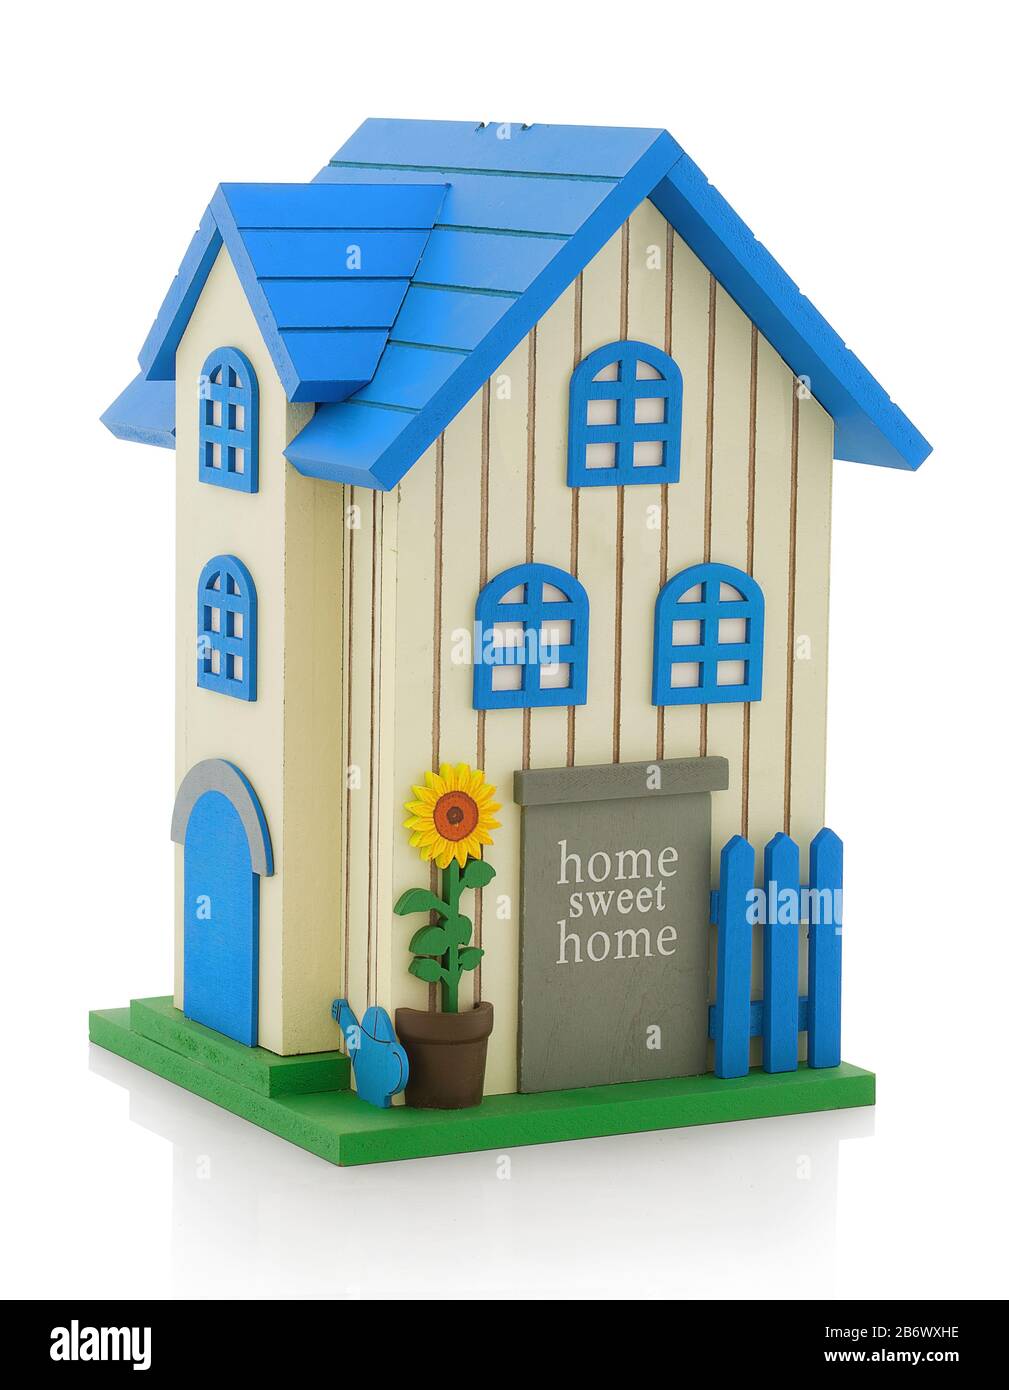 Model of village house made of wood. Wooden dwelling with one floor. Maquette of idylic country house. Isolated on white background with shadow reflec Stock Photo